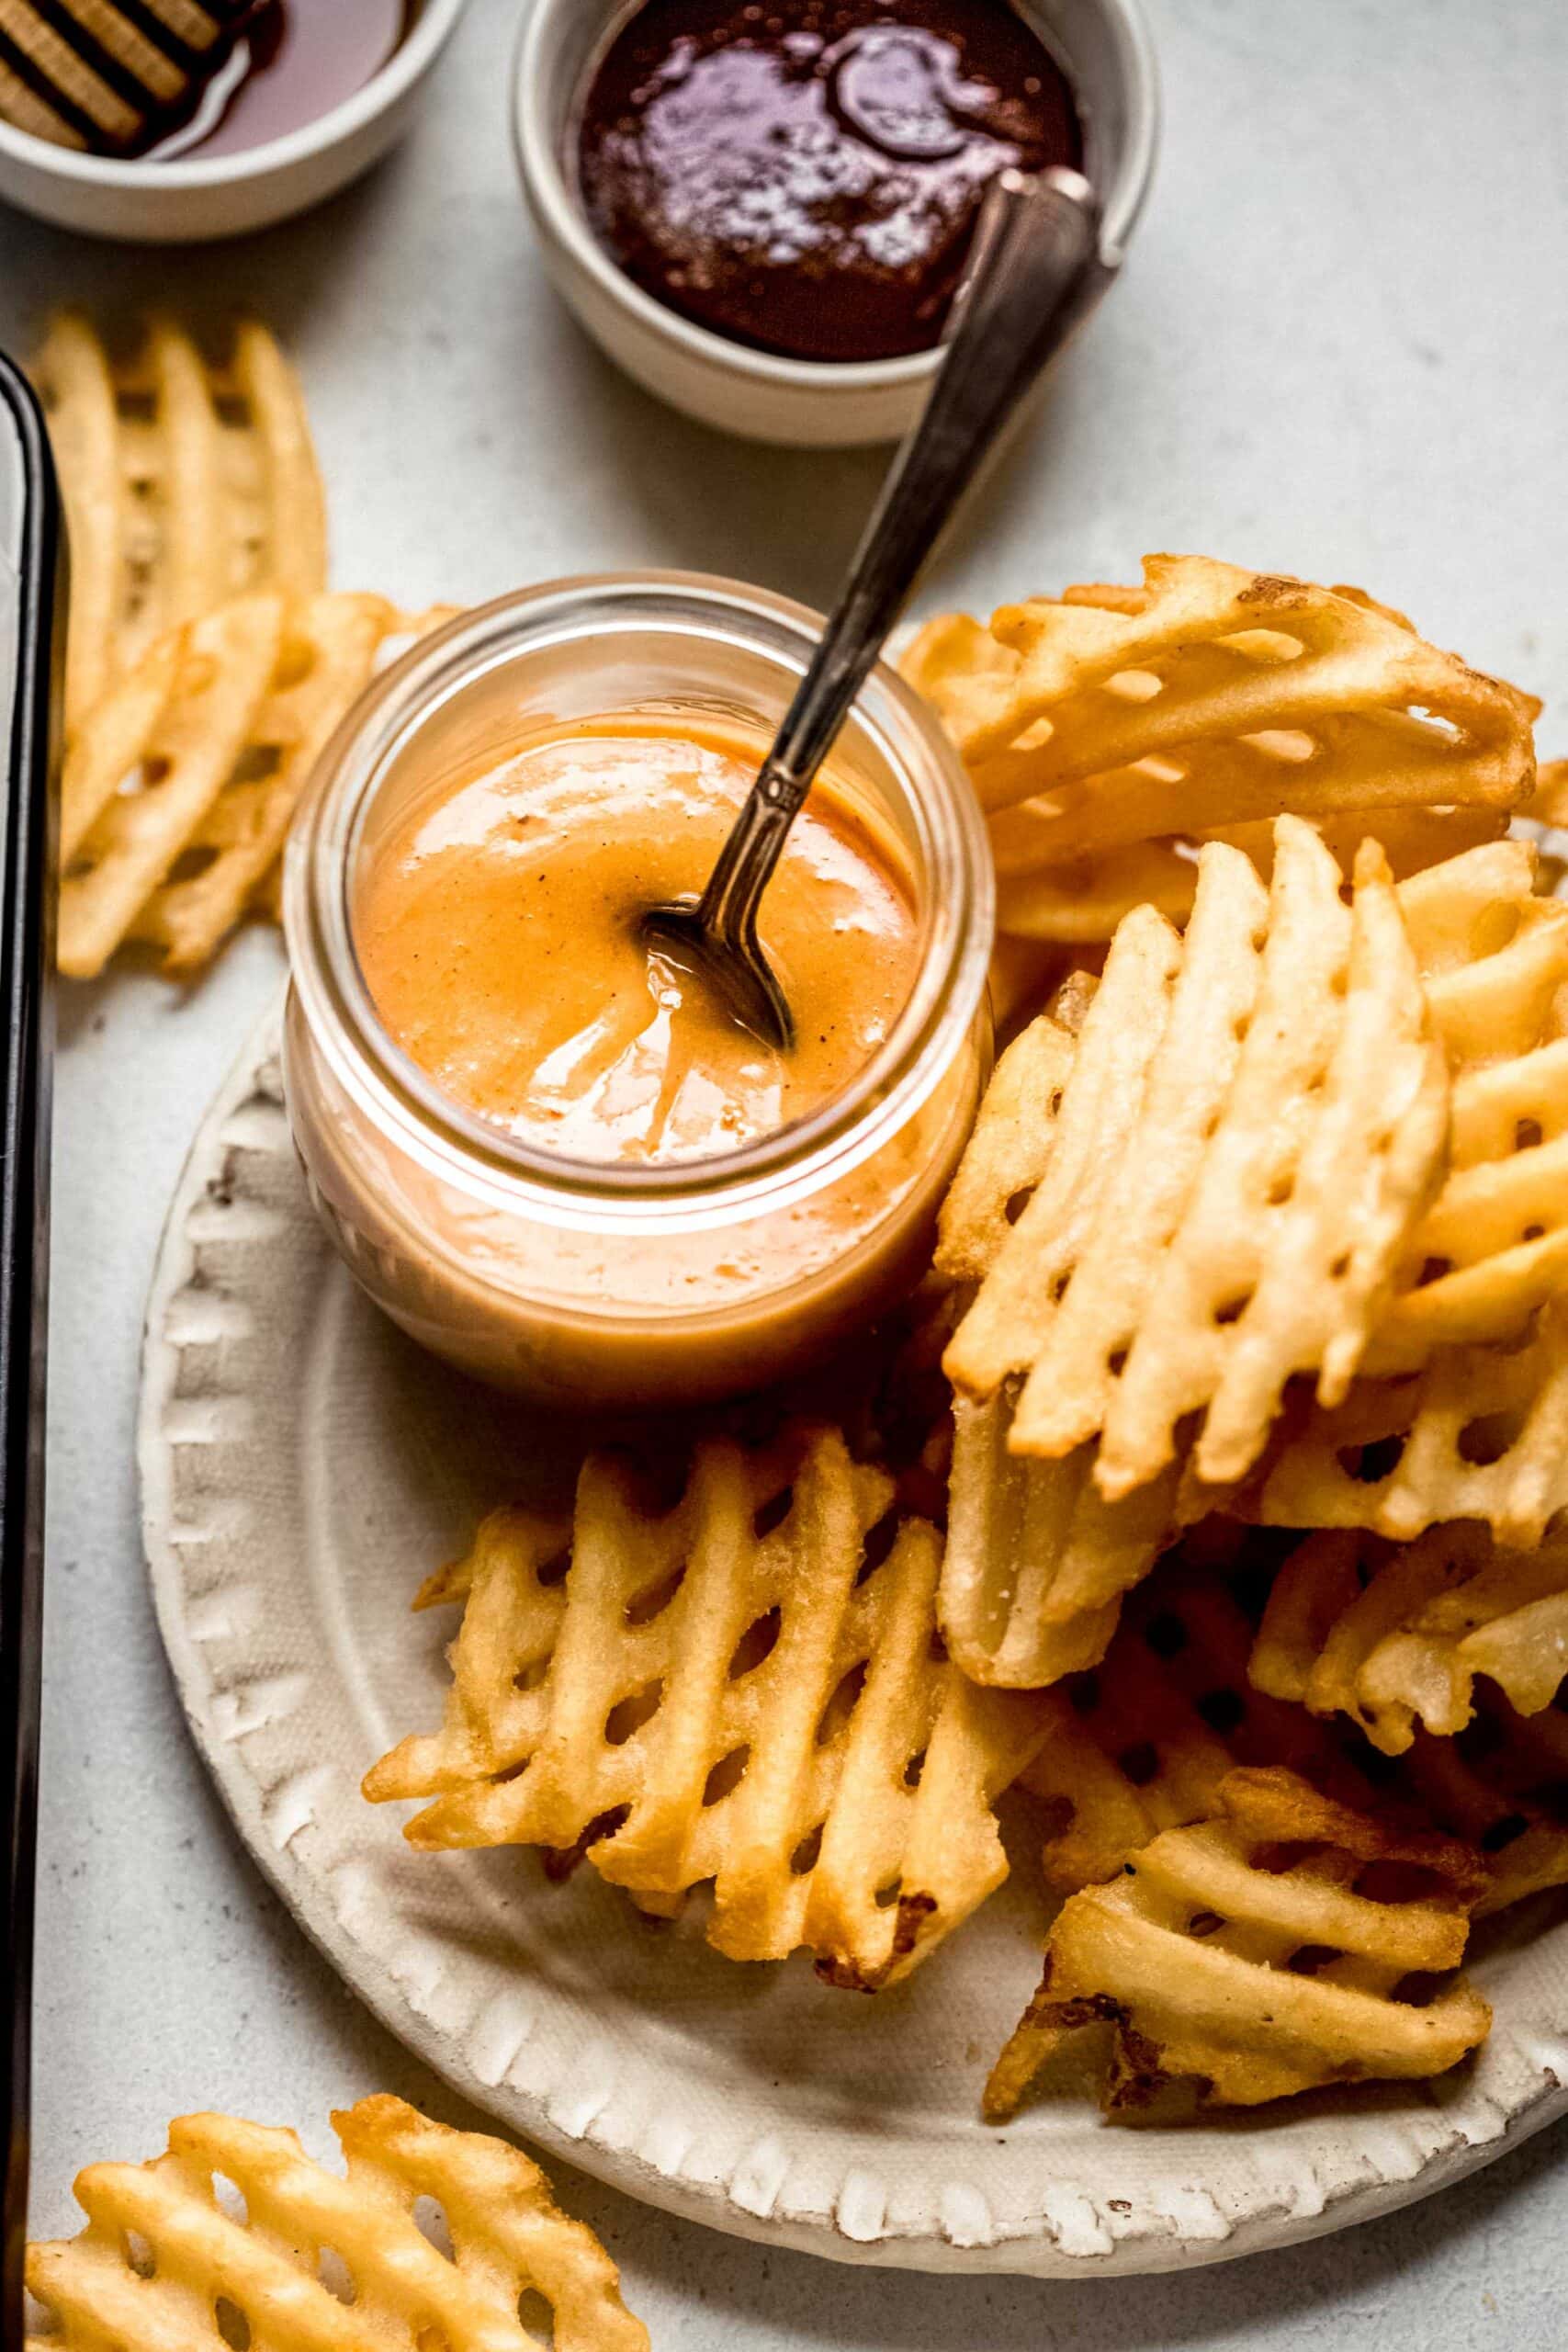 Small jar of chick fil a sauce on plate with waffle fries.